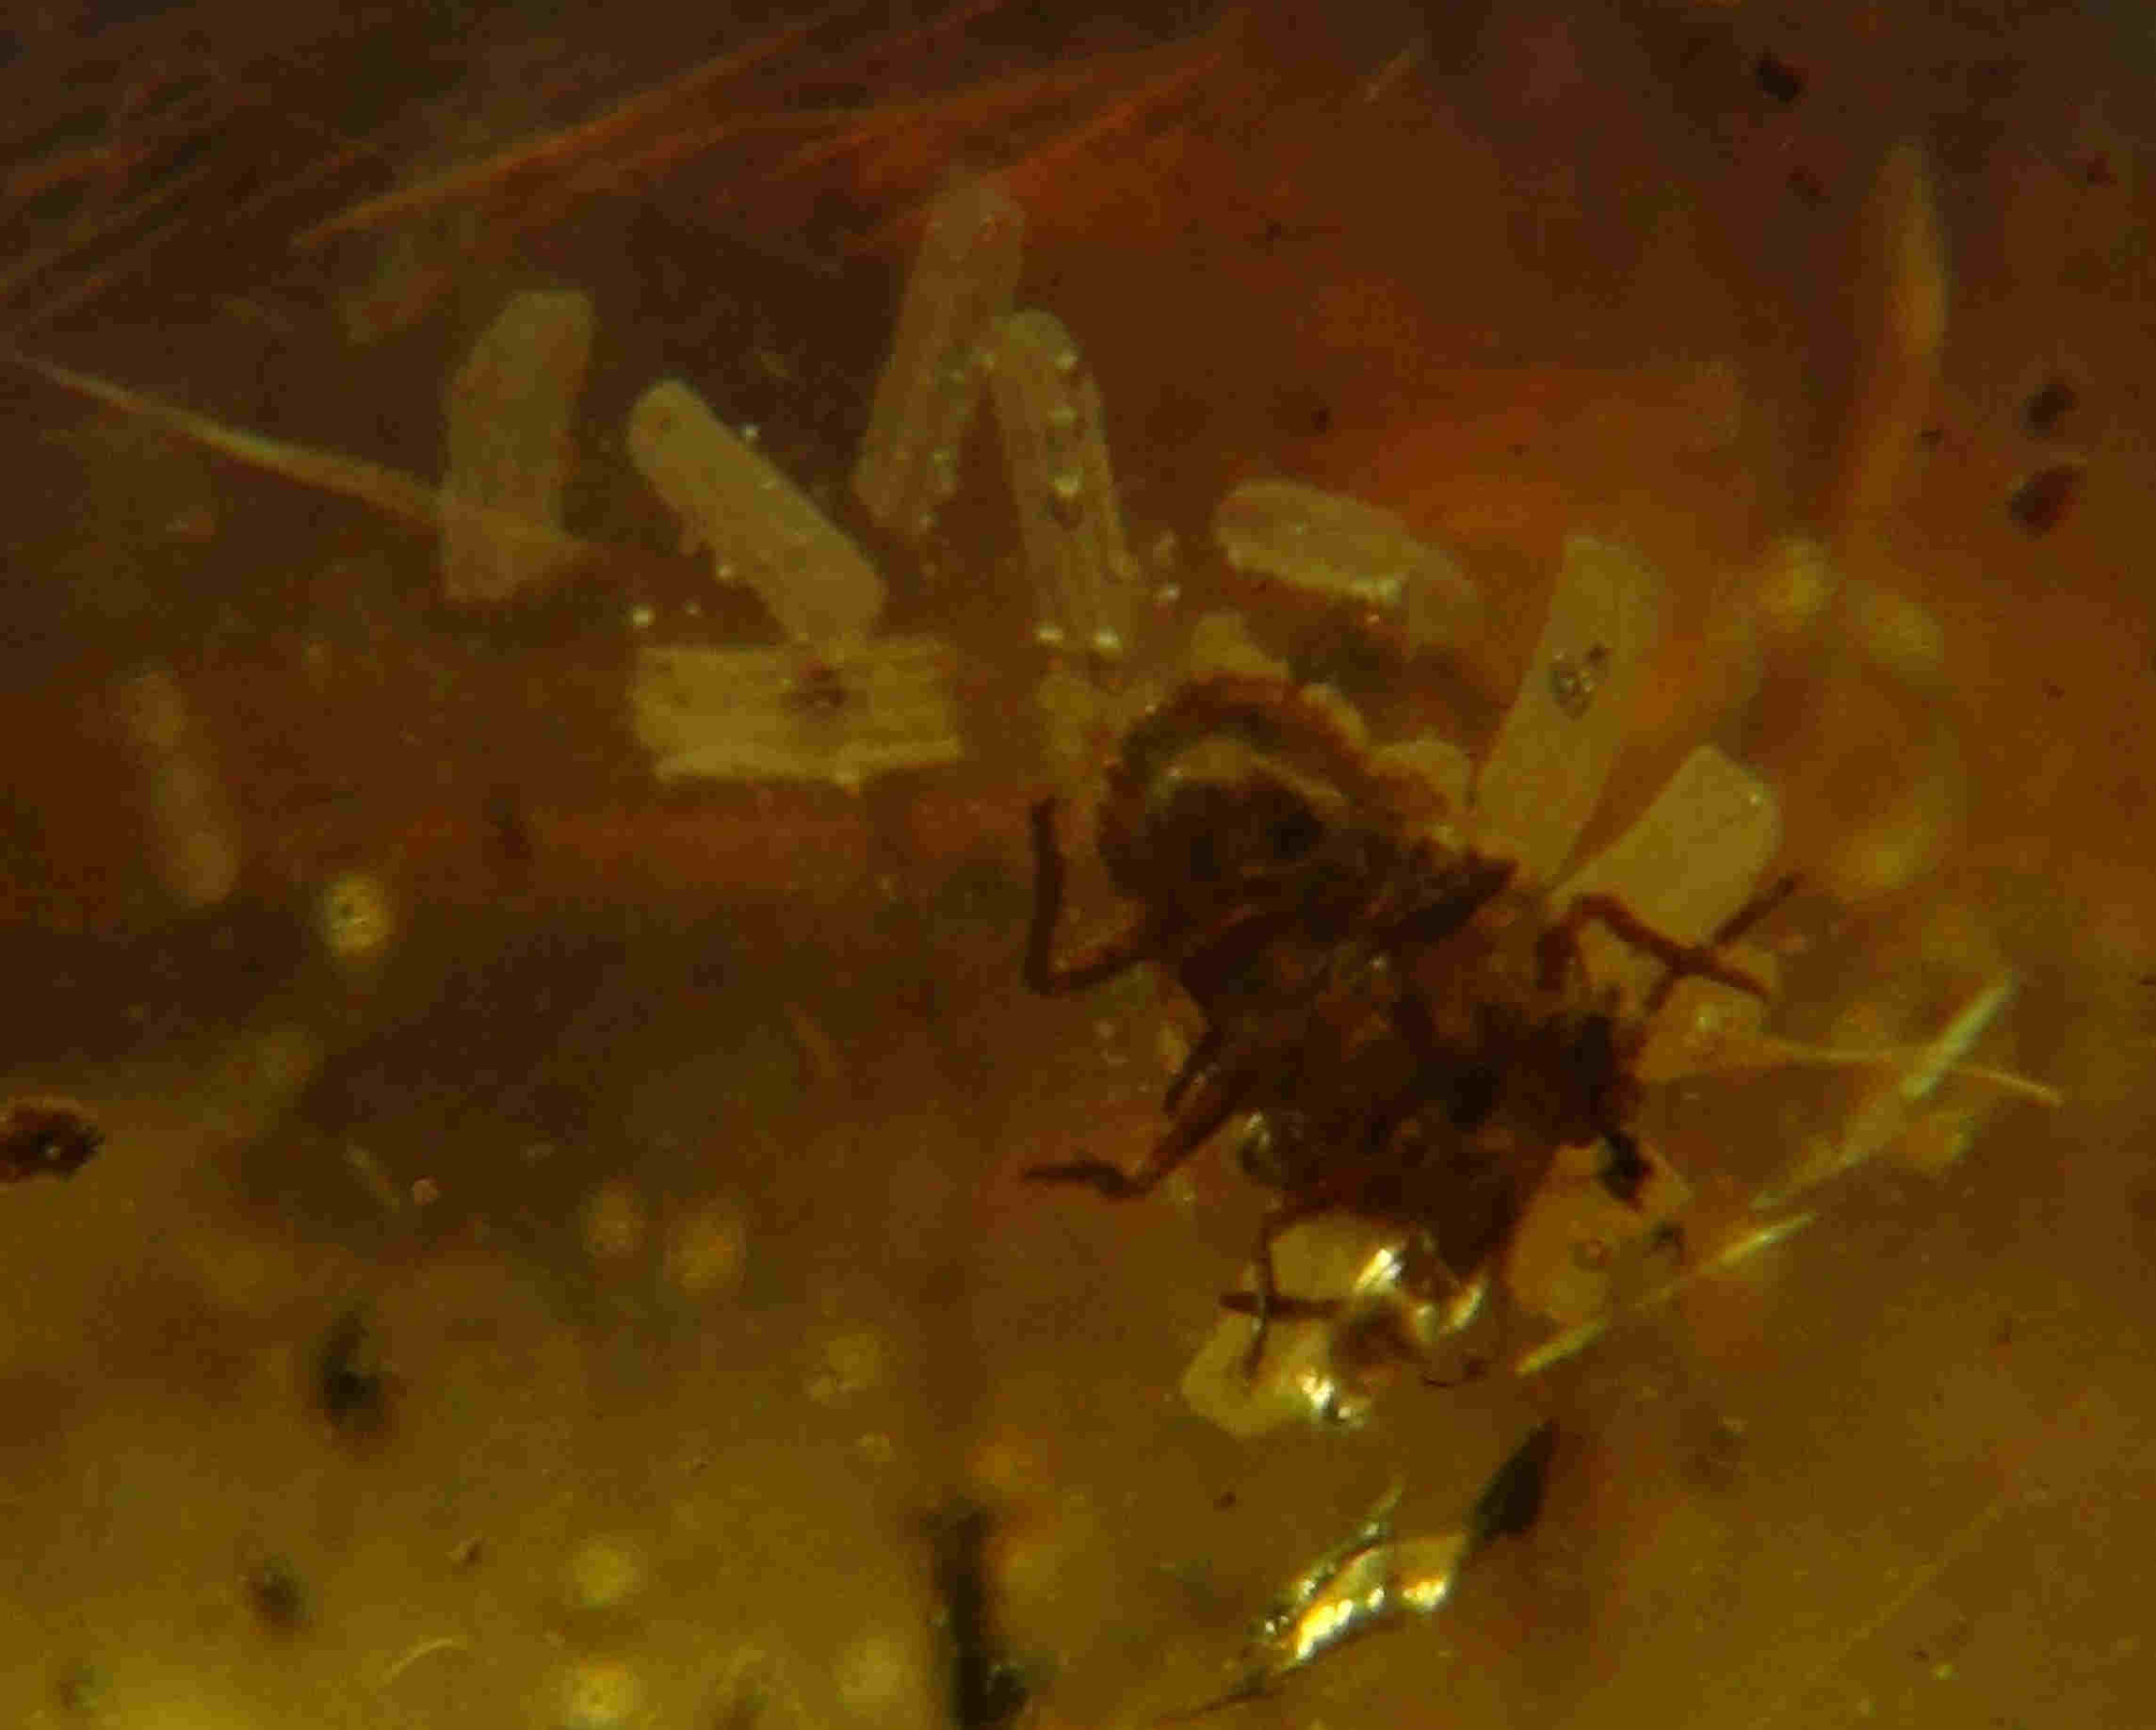 Spider with eggs in amber